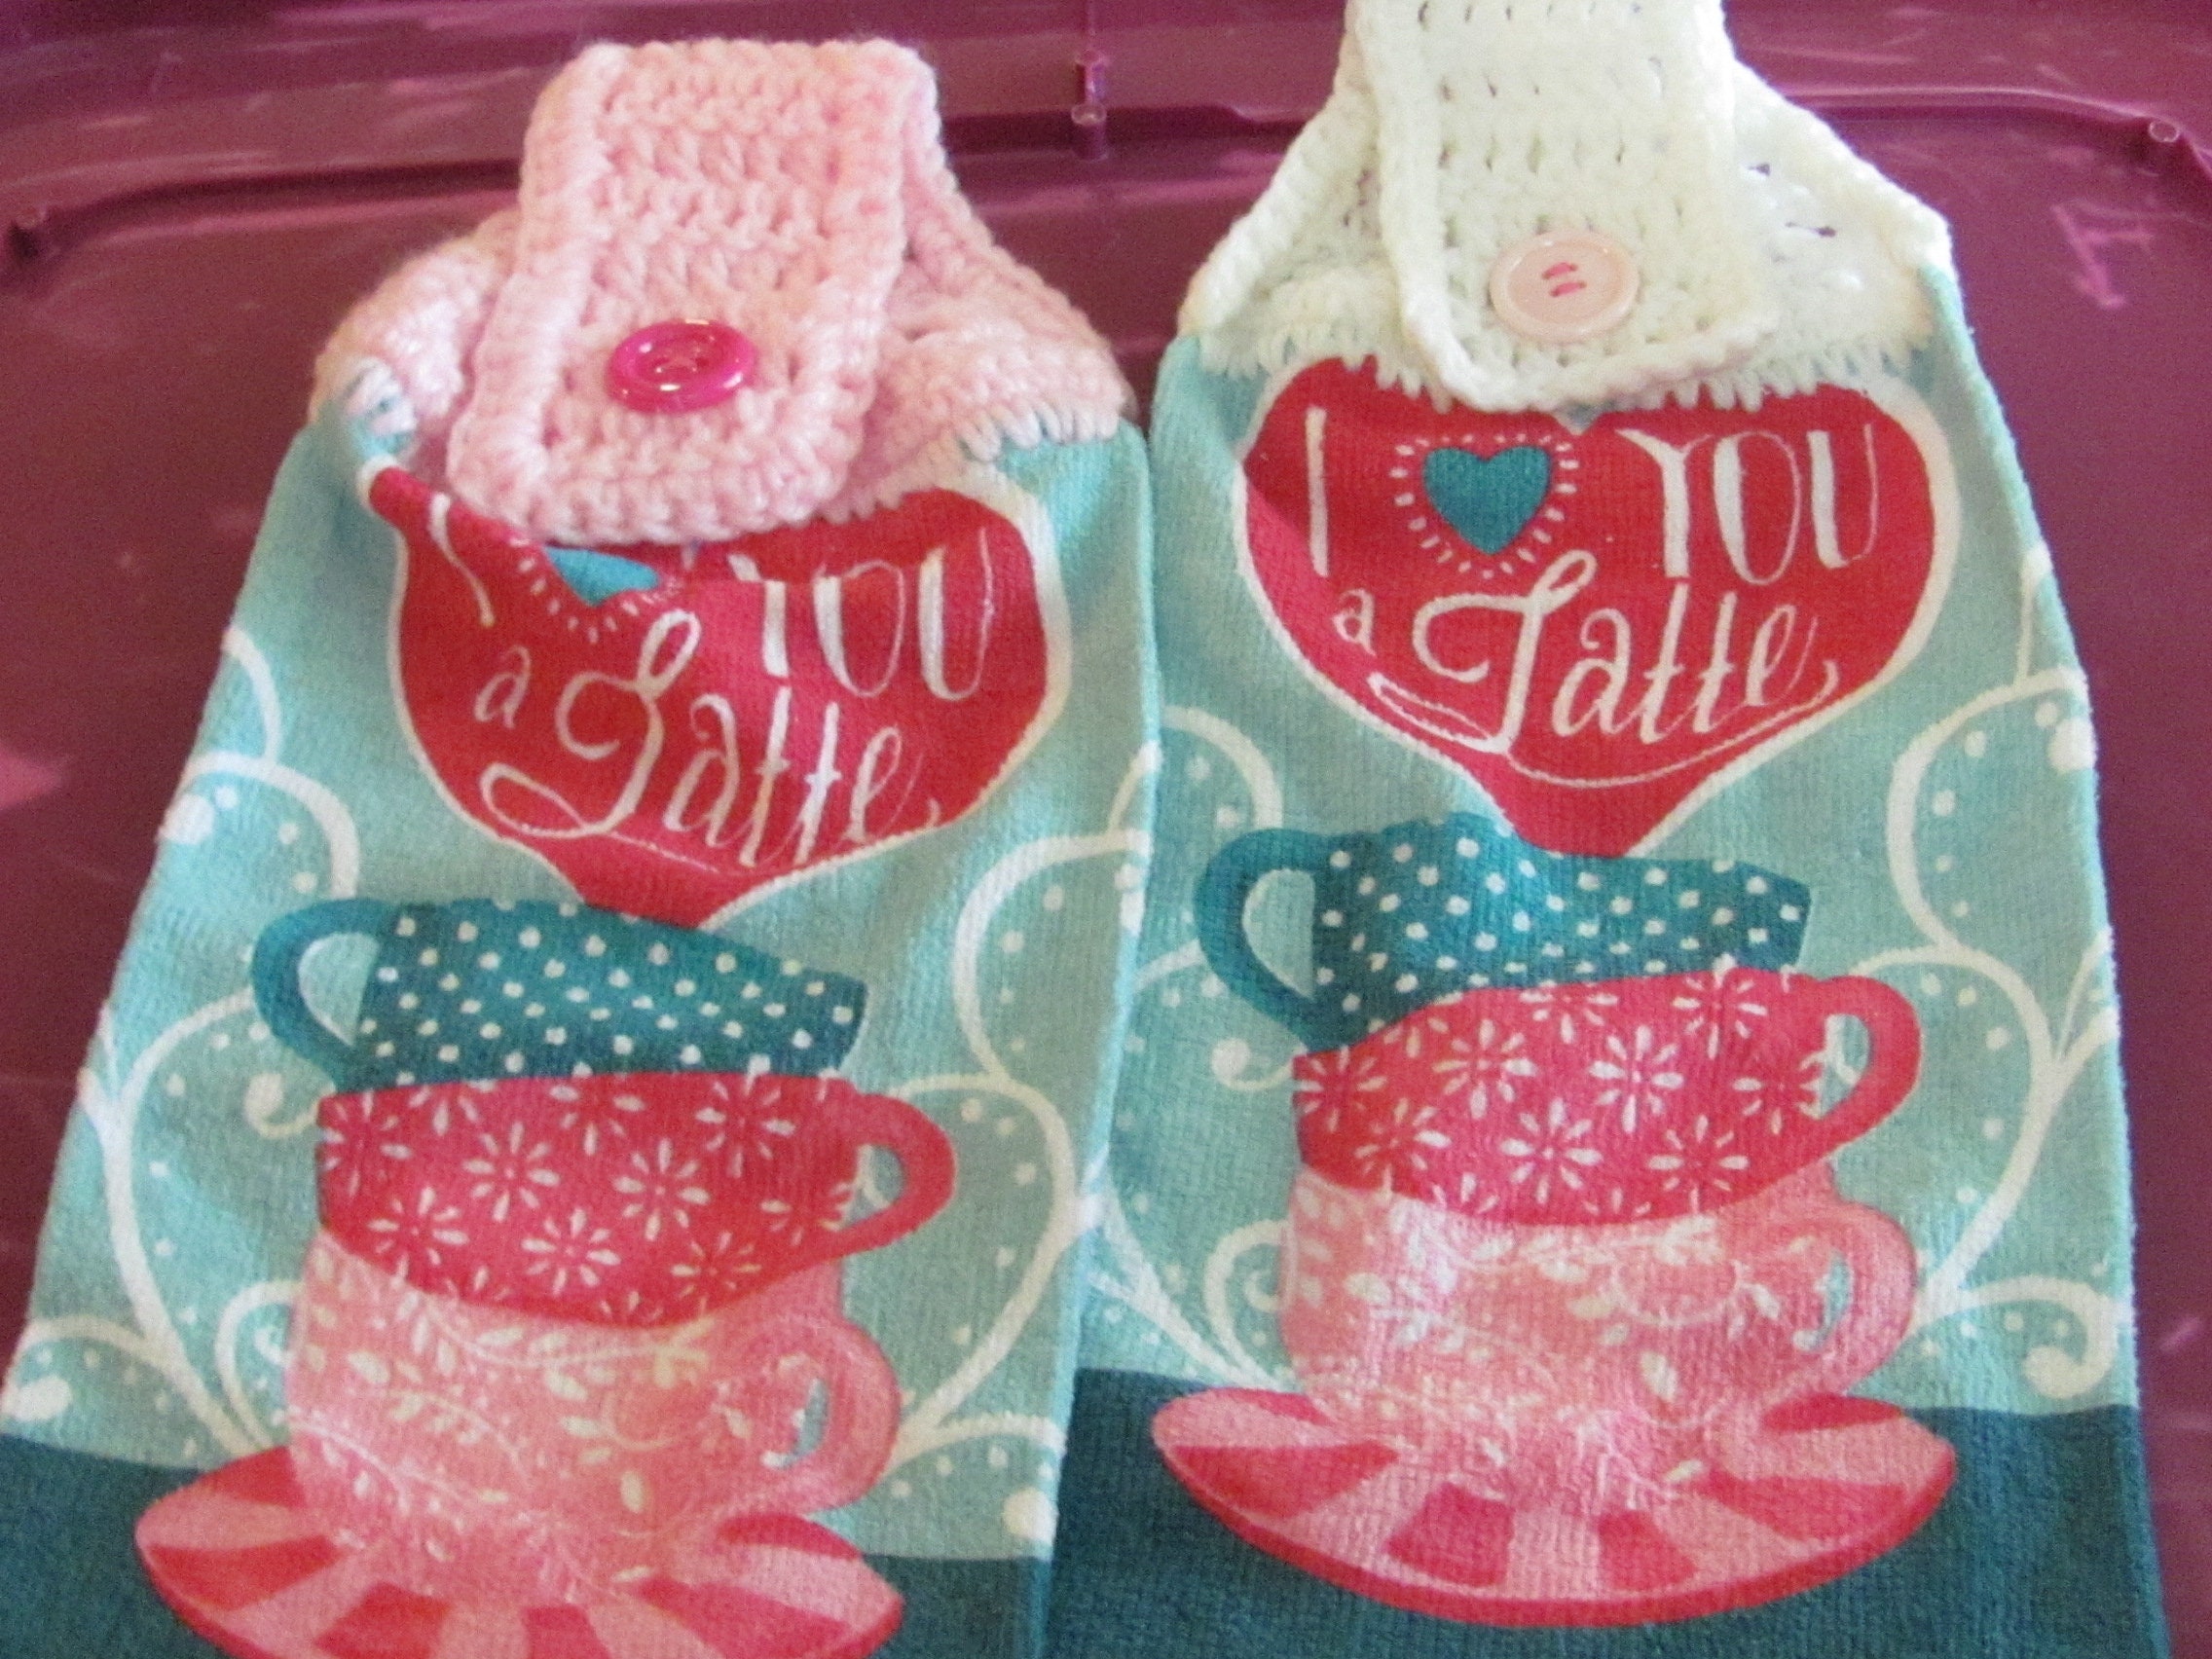 These are homemade crocheted kitchen towels I love you latte with coffee cups